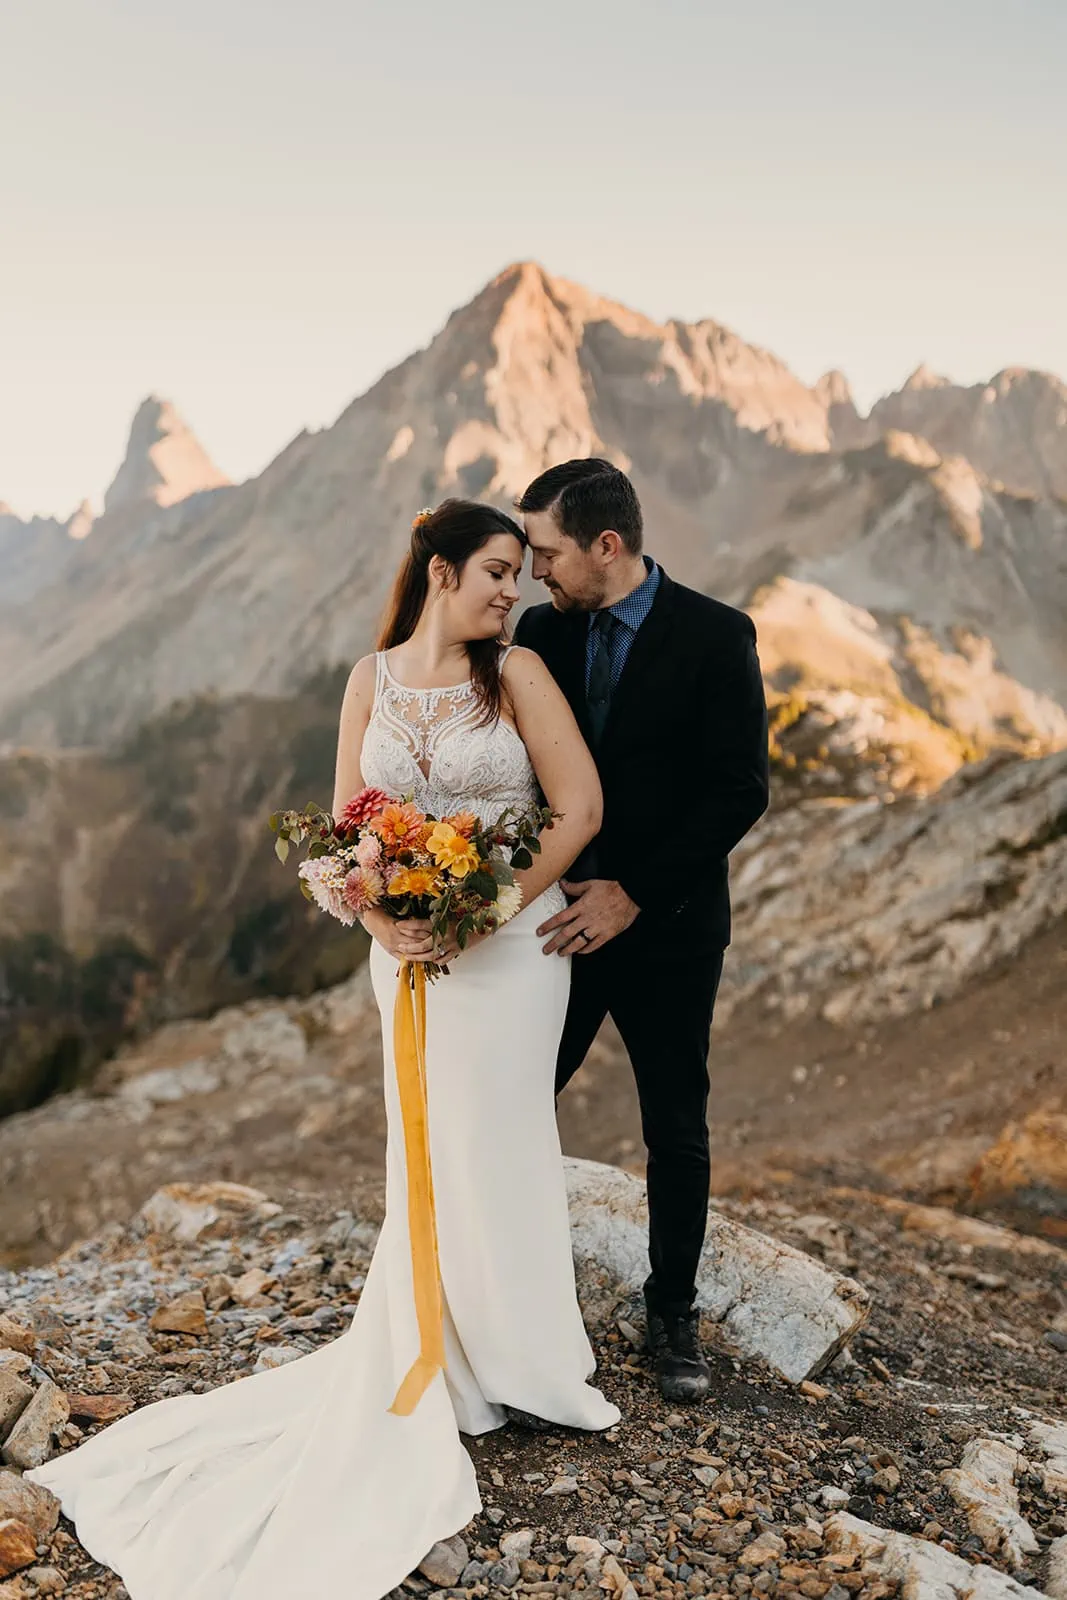 A couple brings their foreheads together for a romantic portrait in the mountains.